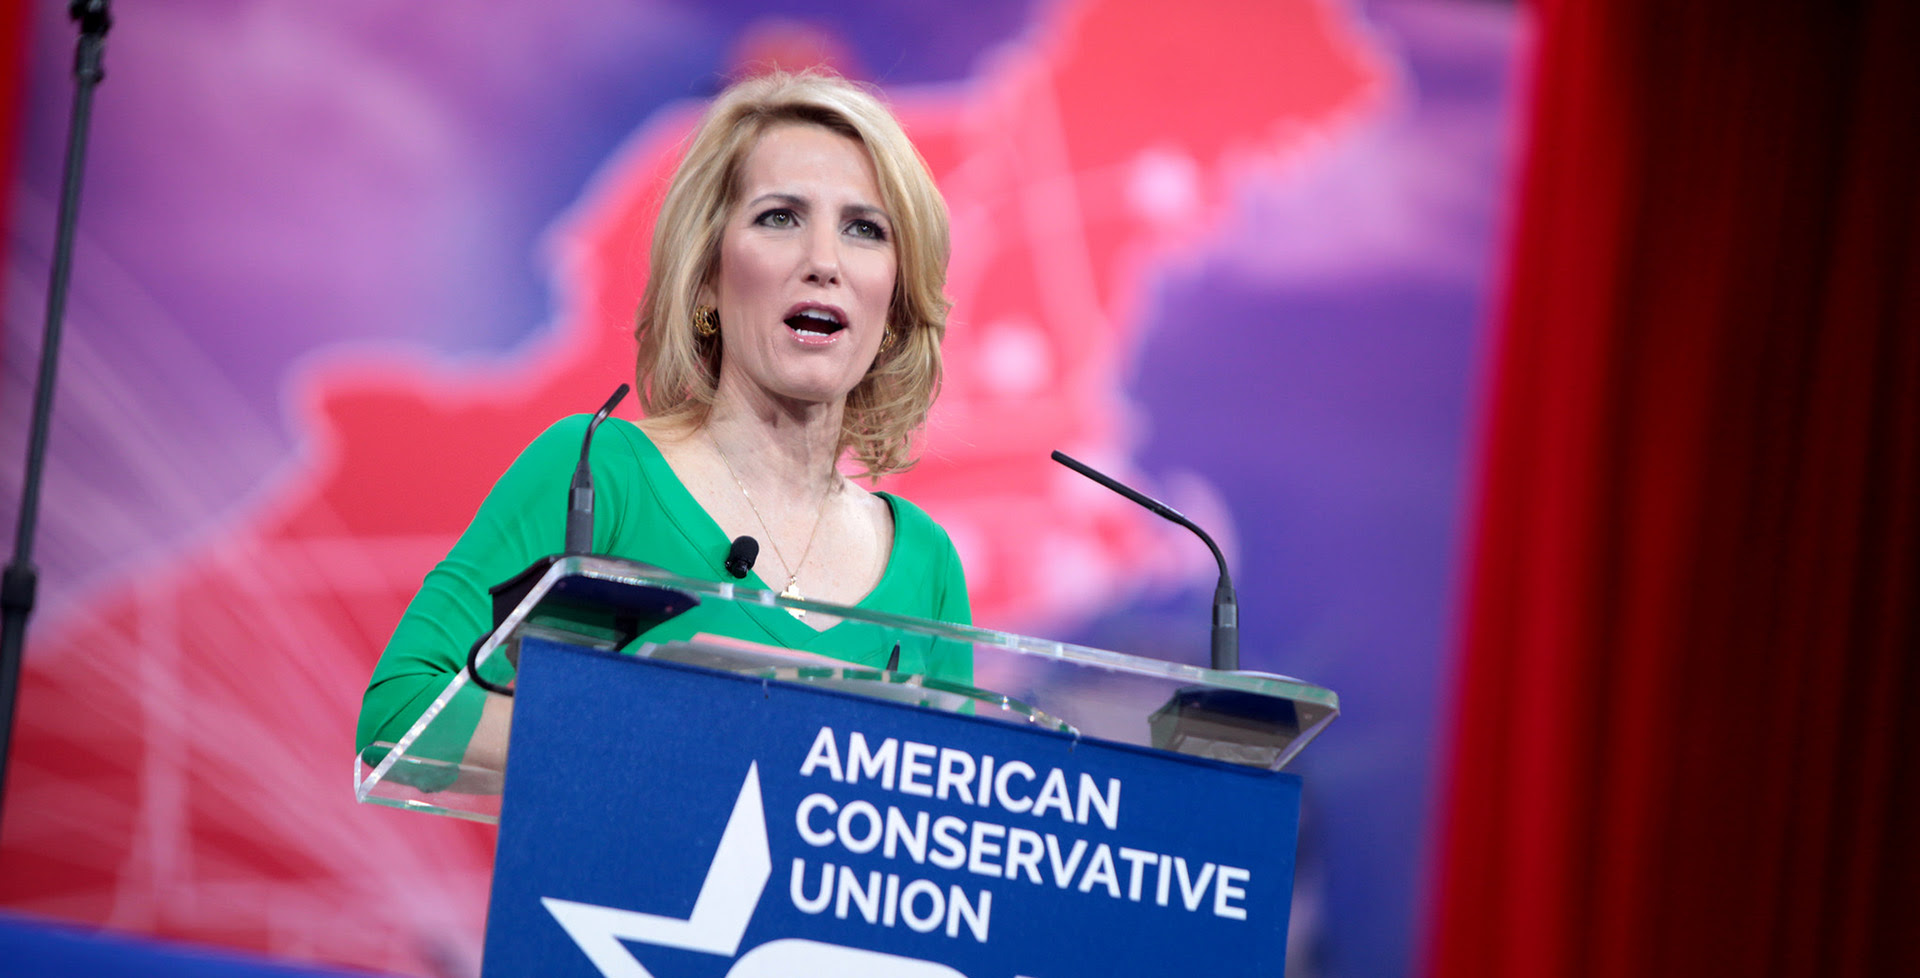 Break the silence: TPP stands with Laura Ingraham and conservatives